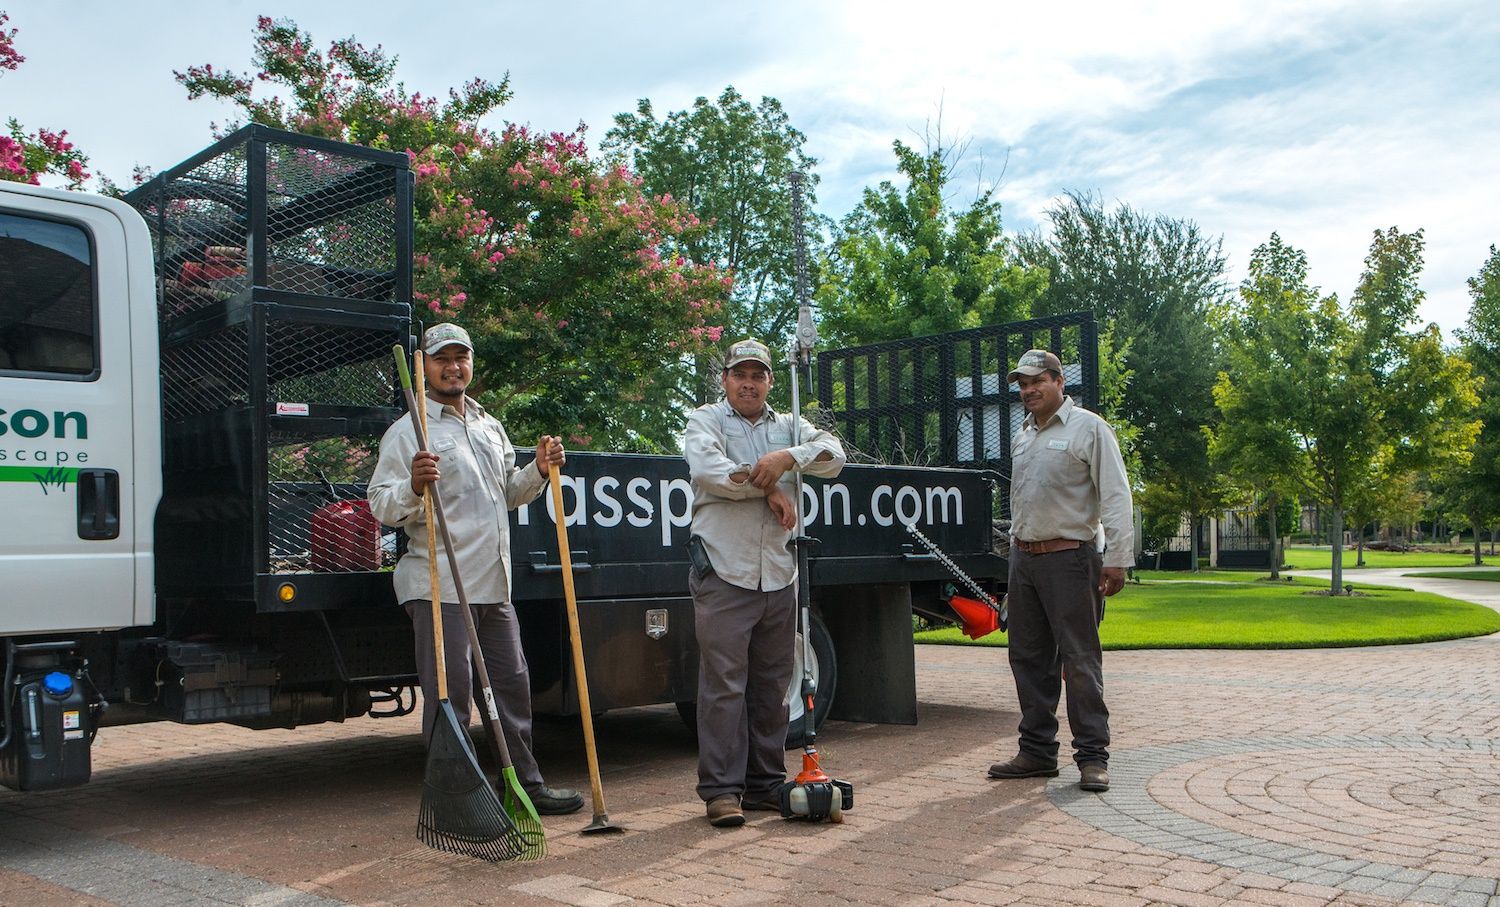 Happy landscaping company employees